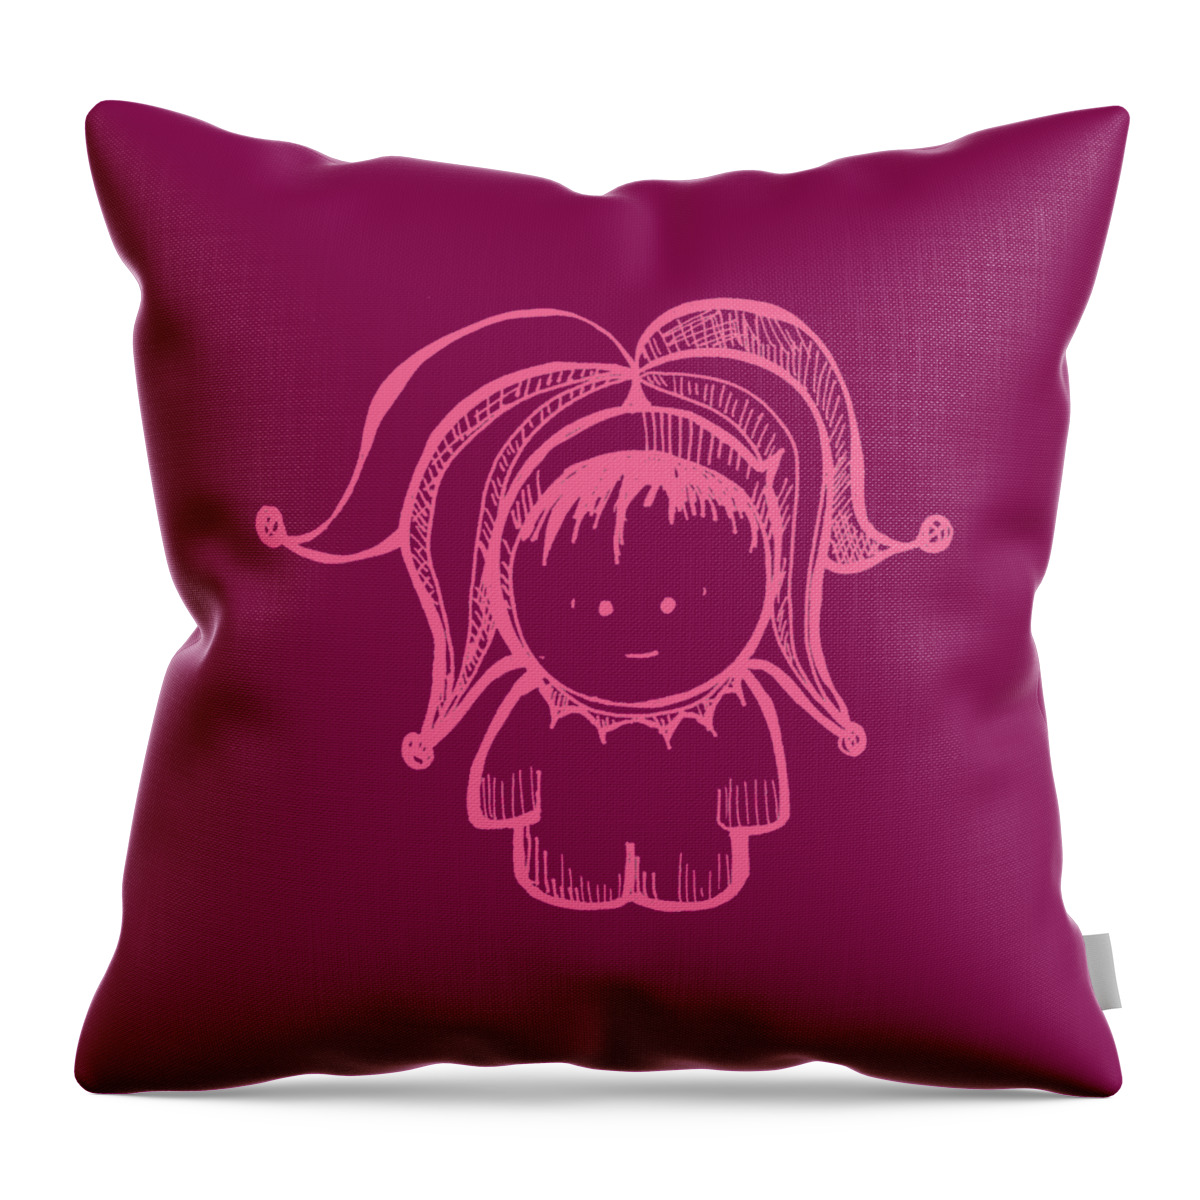 Sleepypants Throw Pillow featuring the drawing Sillypants by Unhinged Artistry